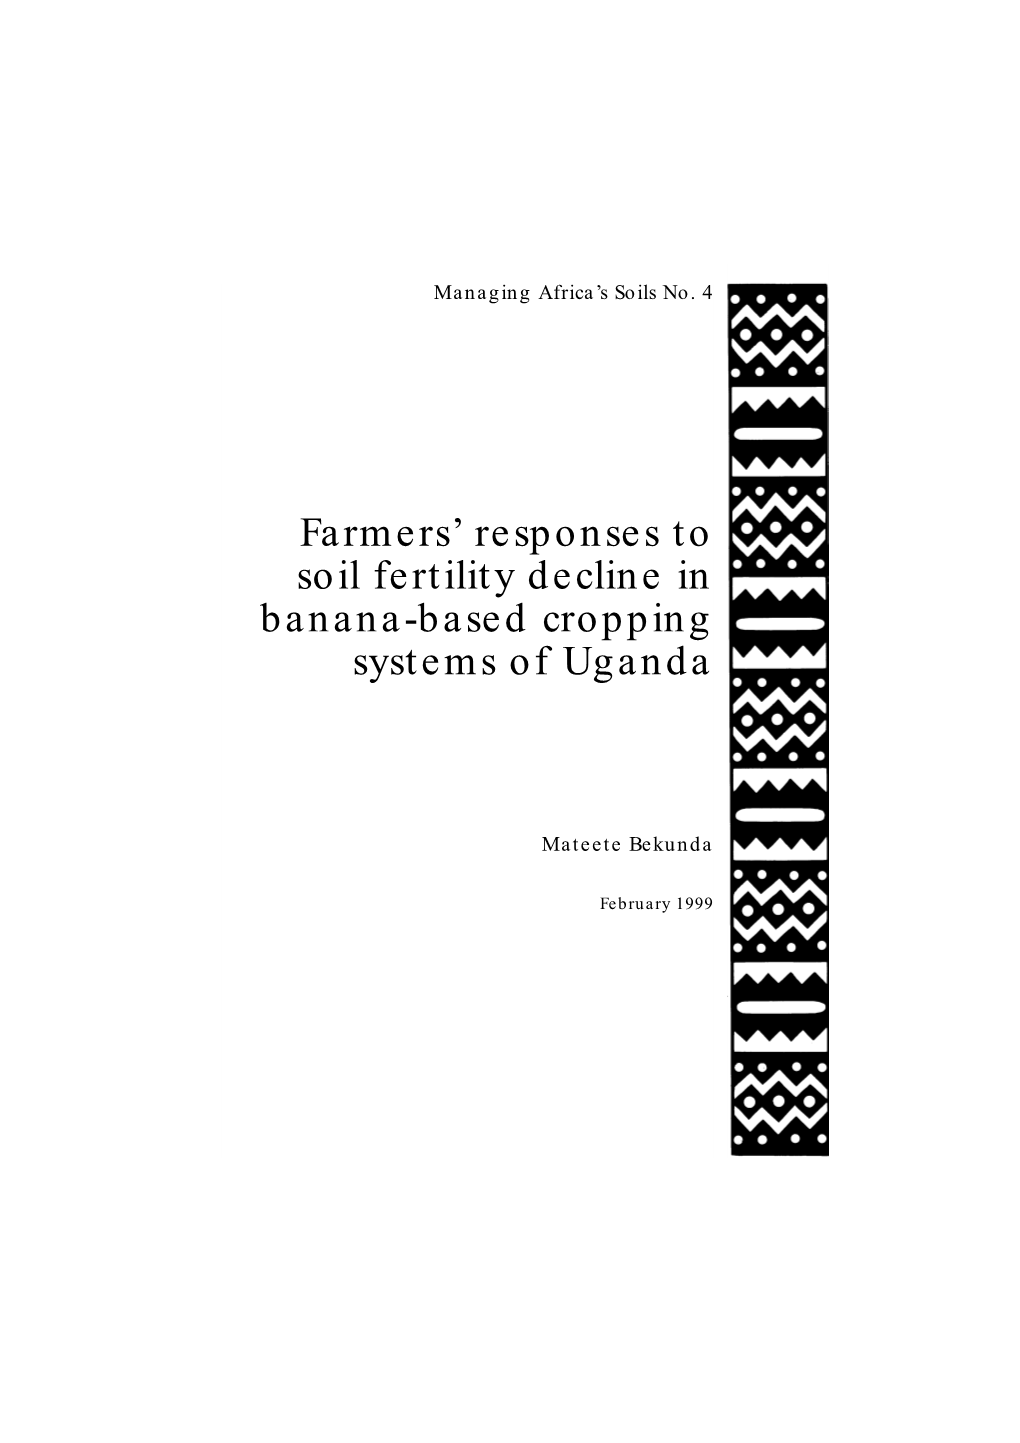 Farmers' Responses to Soil Fertility Decline in Banana-Based Cropping